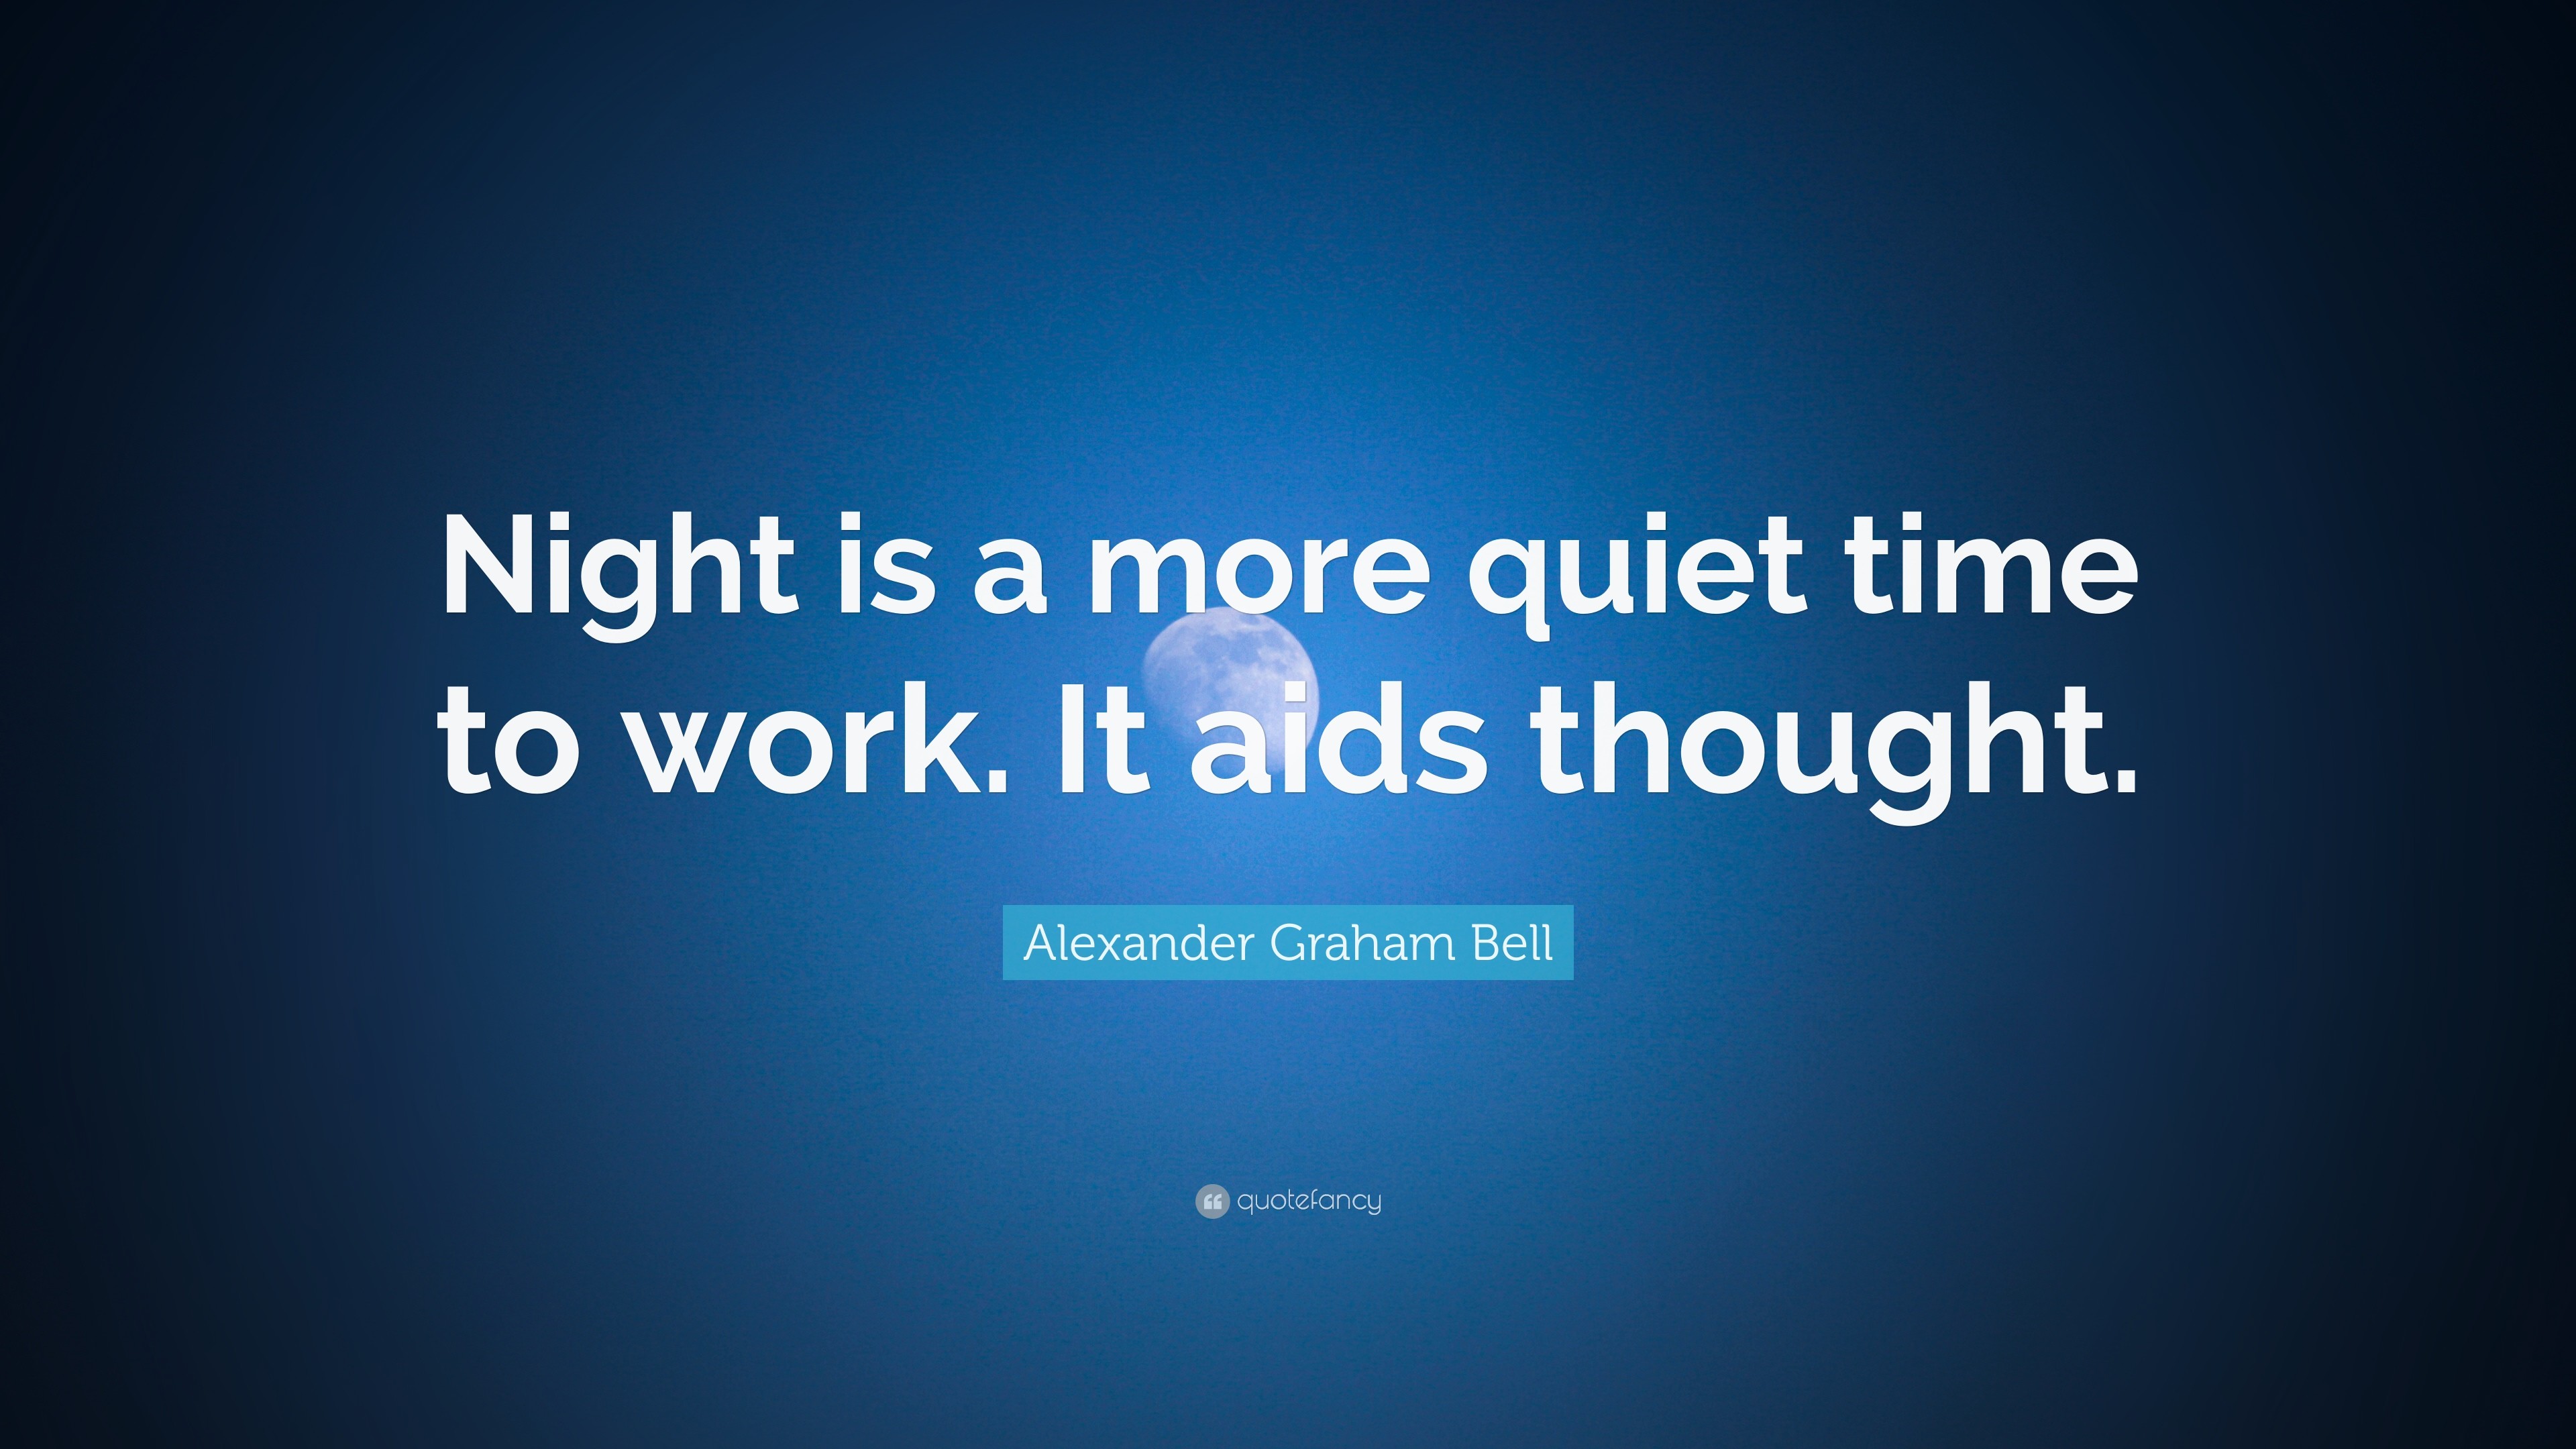 3840x2160 Alexander Graham Bell Quote: “Night is a more quiet time to work. It